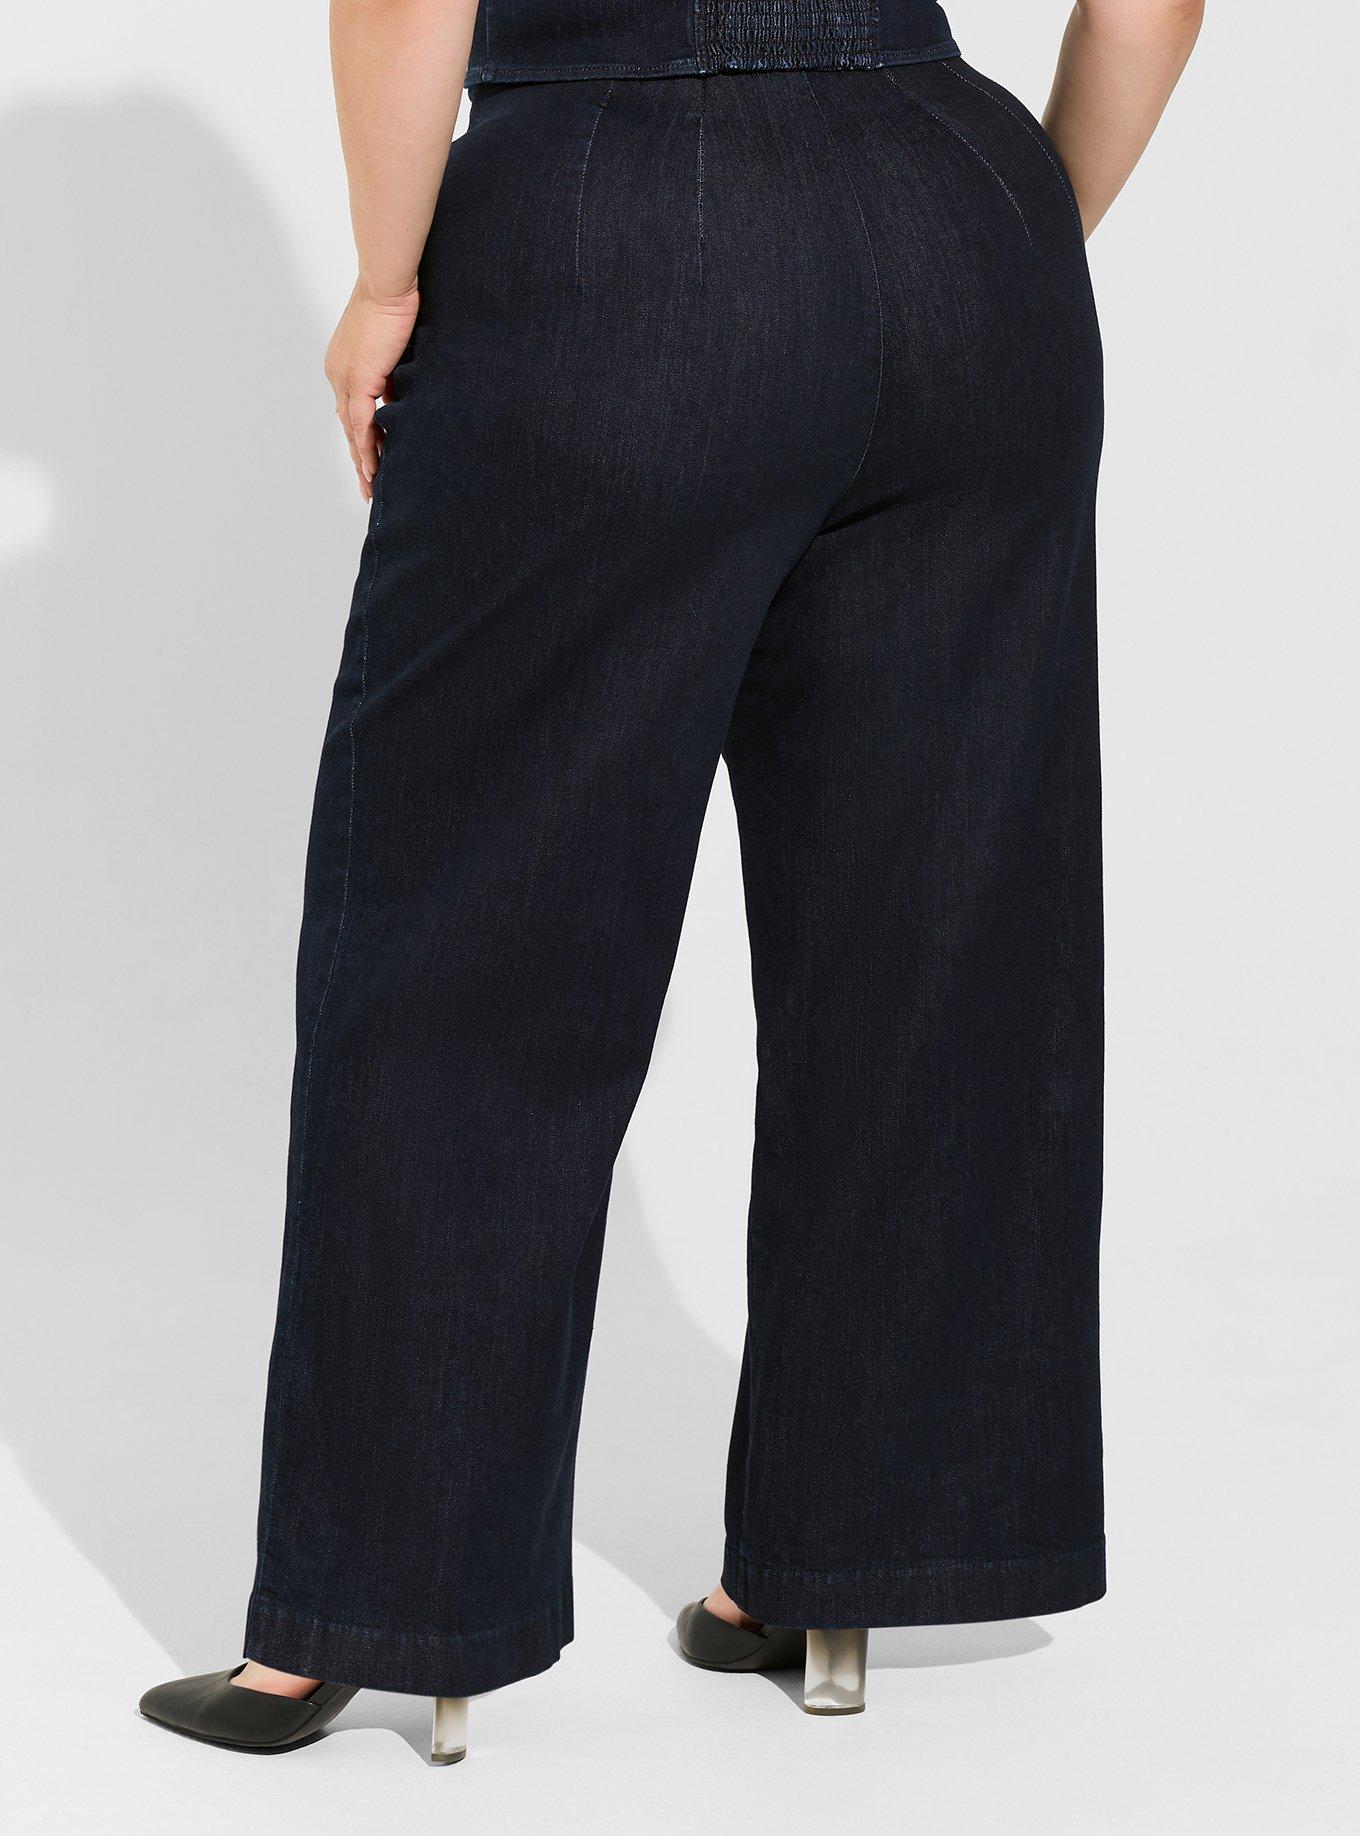 Big Butt Plus Size Stretchy High Waisted Jeans  Denim Pants Autumn Female  Ass in Jeans High Waist Trousers